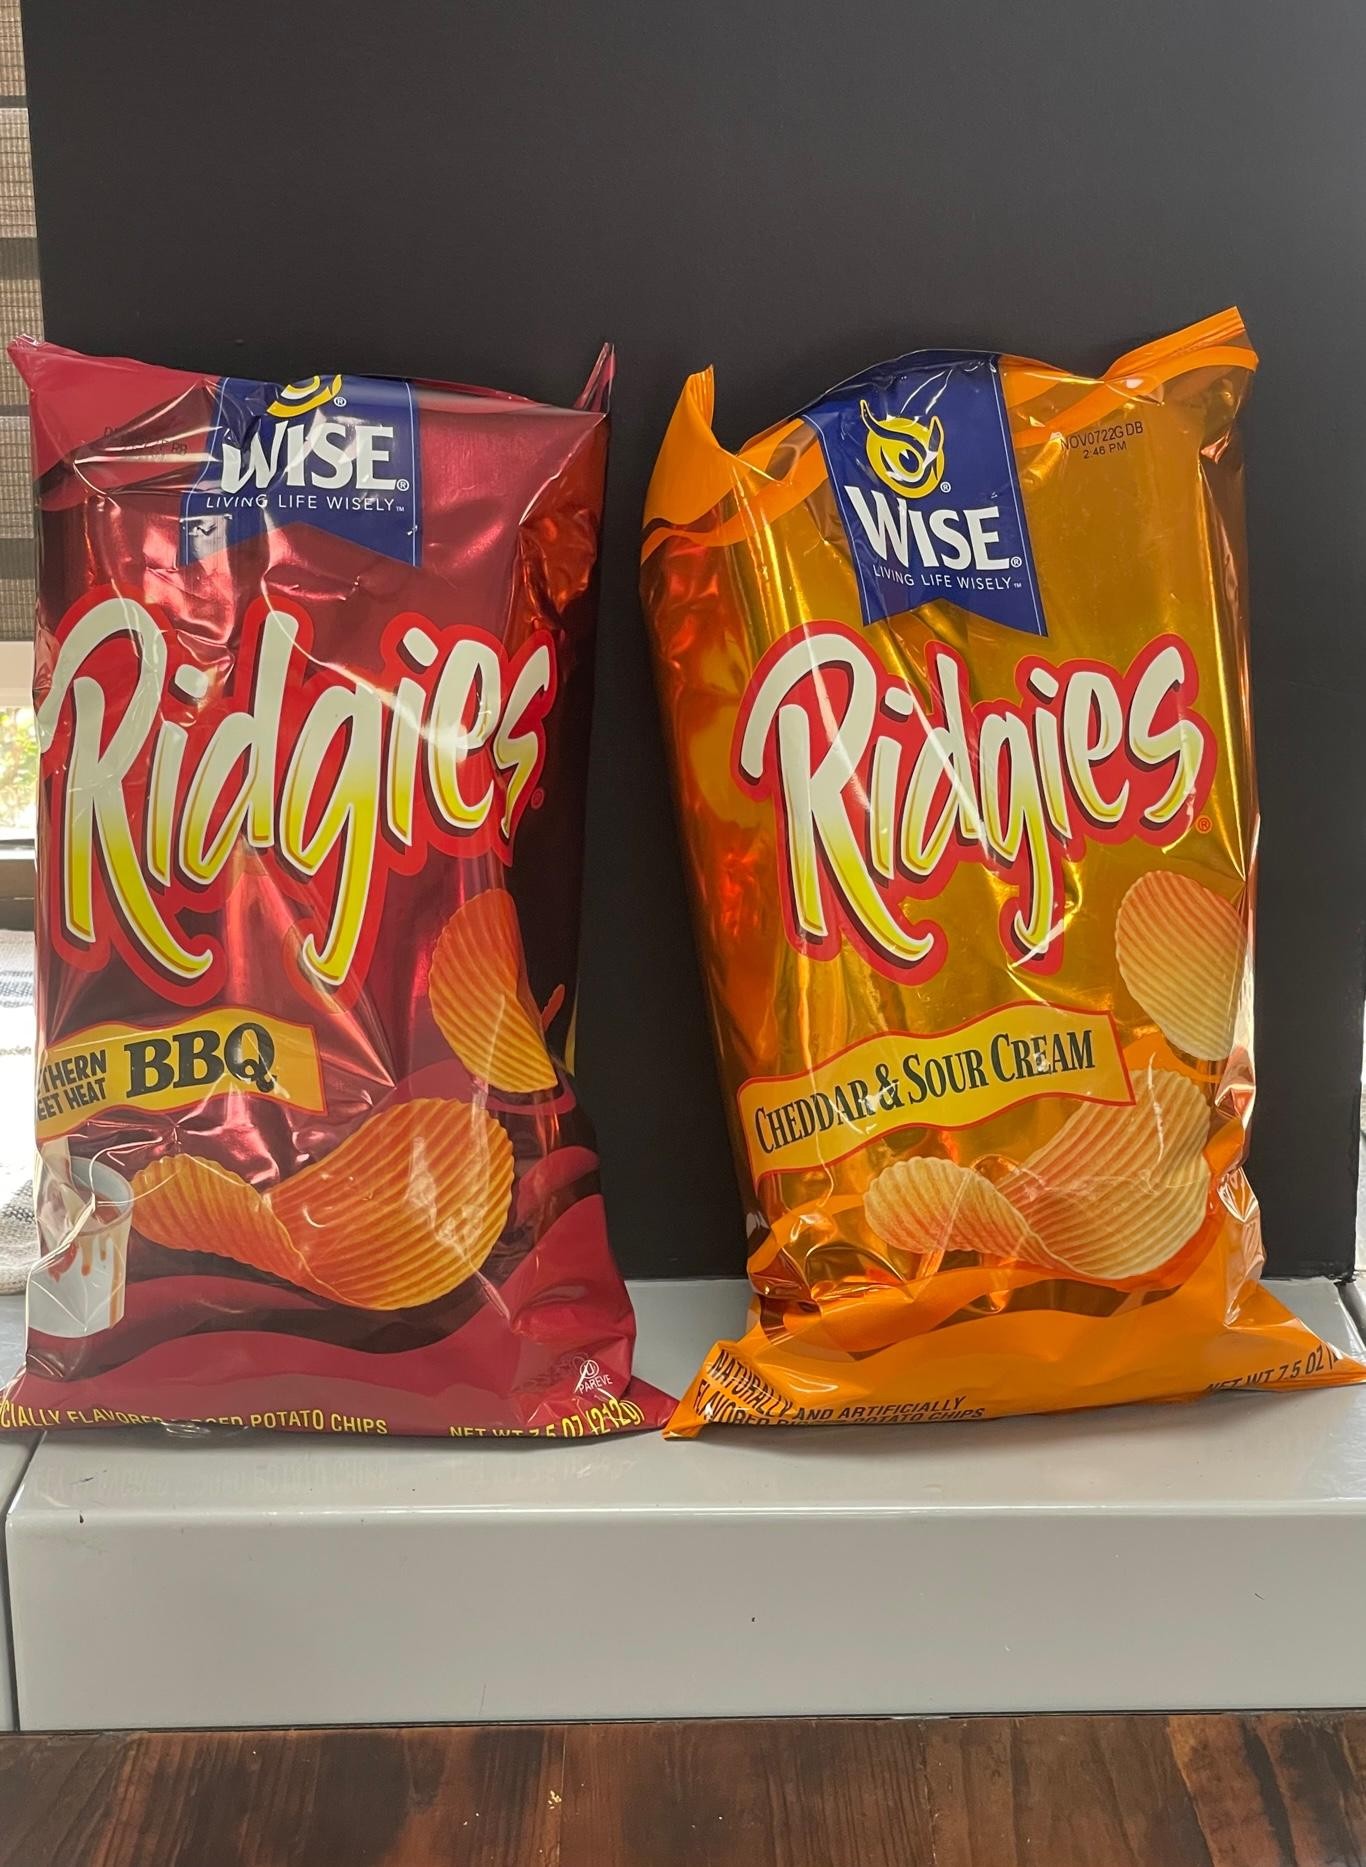 Wise Chips /products